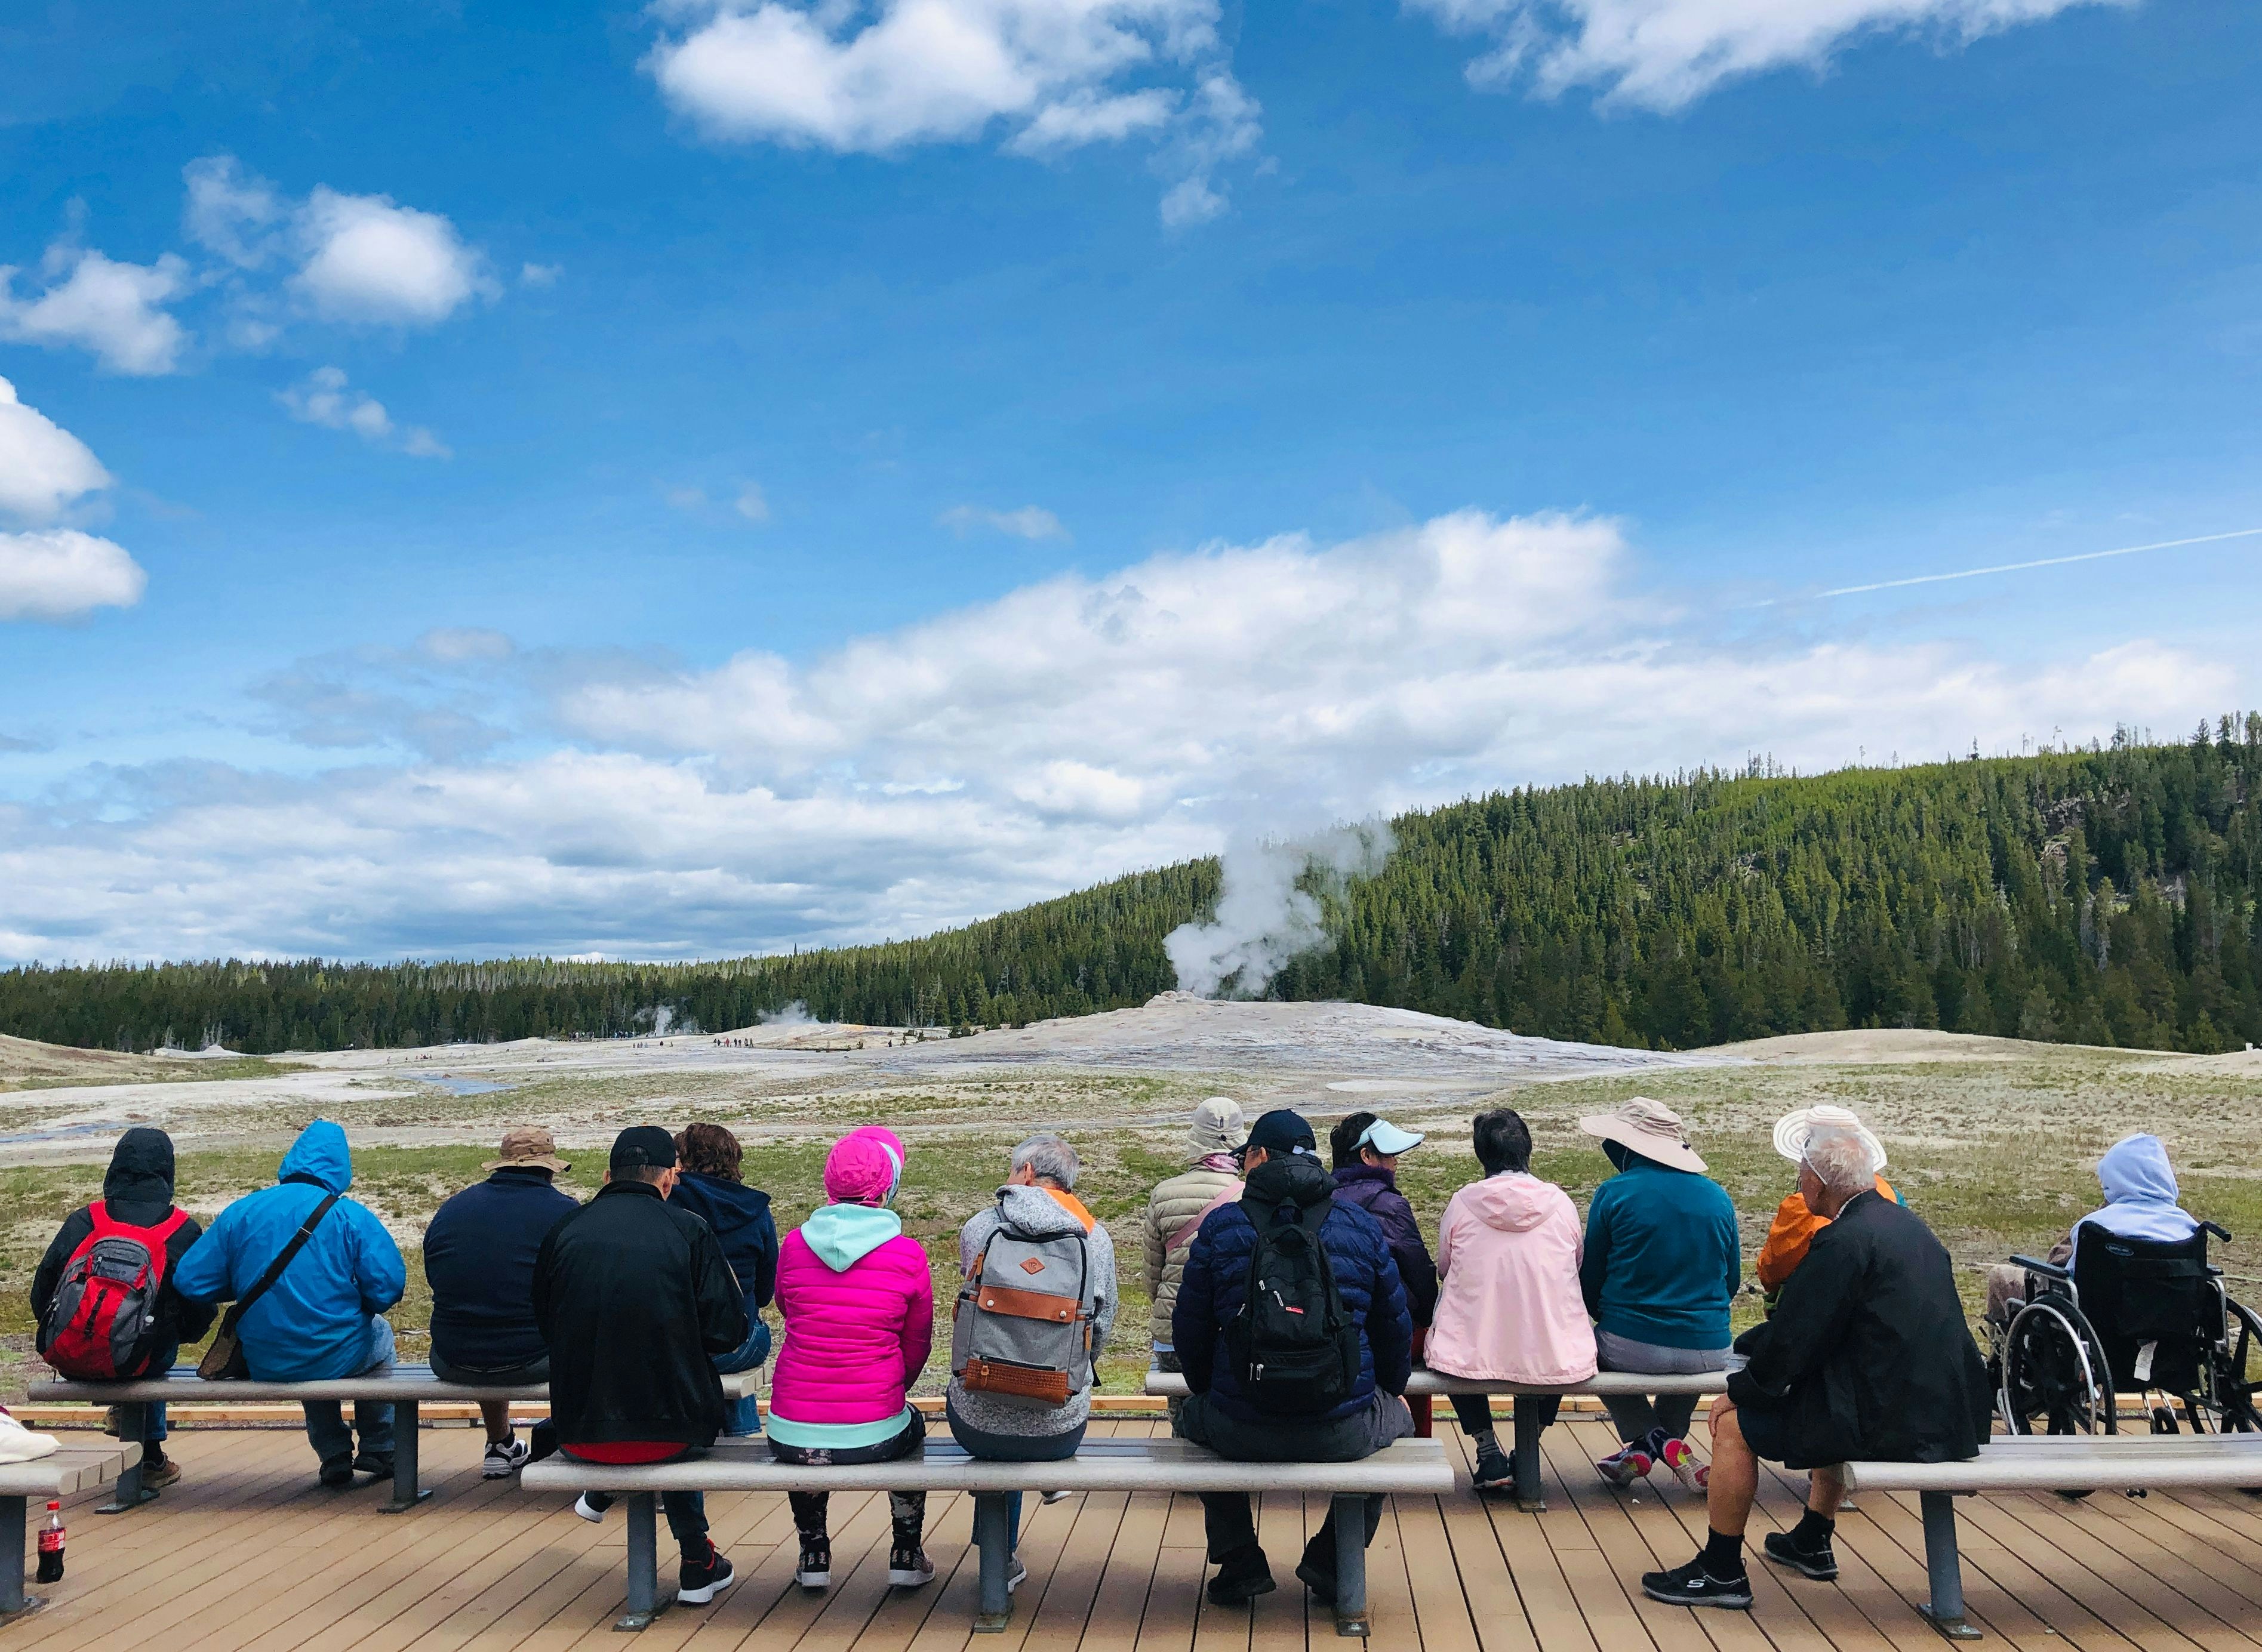 Tourists wait for the eruption of Old Faithful geyser in Yellowstone National Park in Wyoming on June 11, 2019. - Old Faithful has erupted every 44 to 125 minutes since 2000. (Photo by Daniel SLIM / AFP)